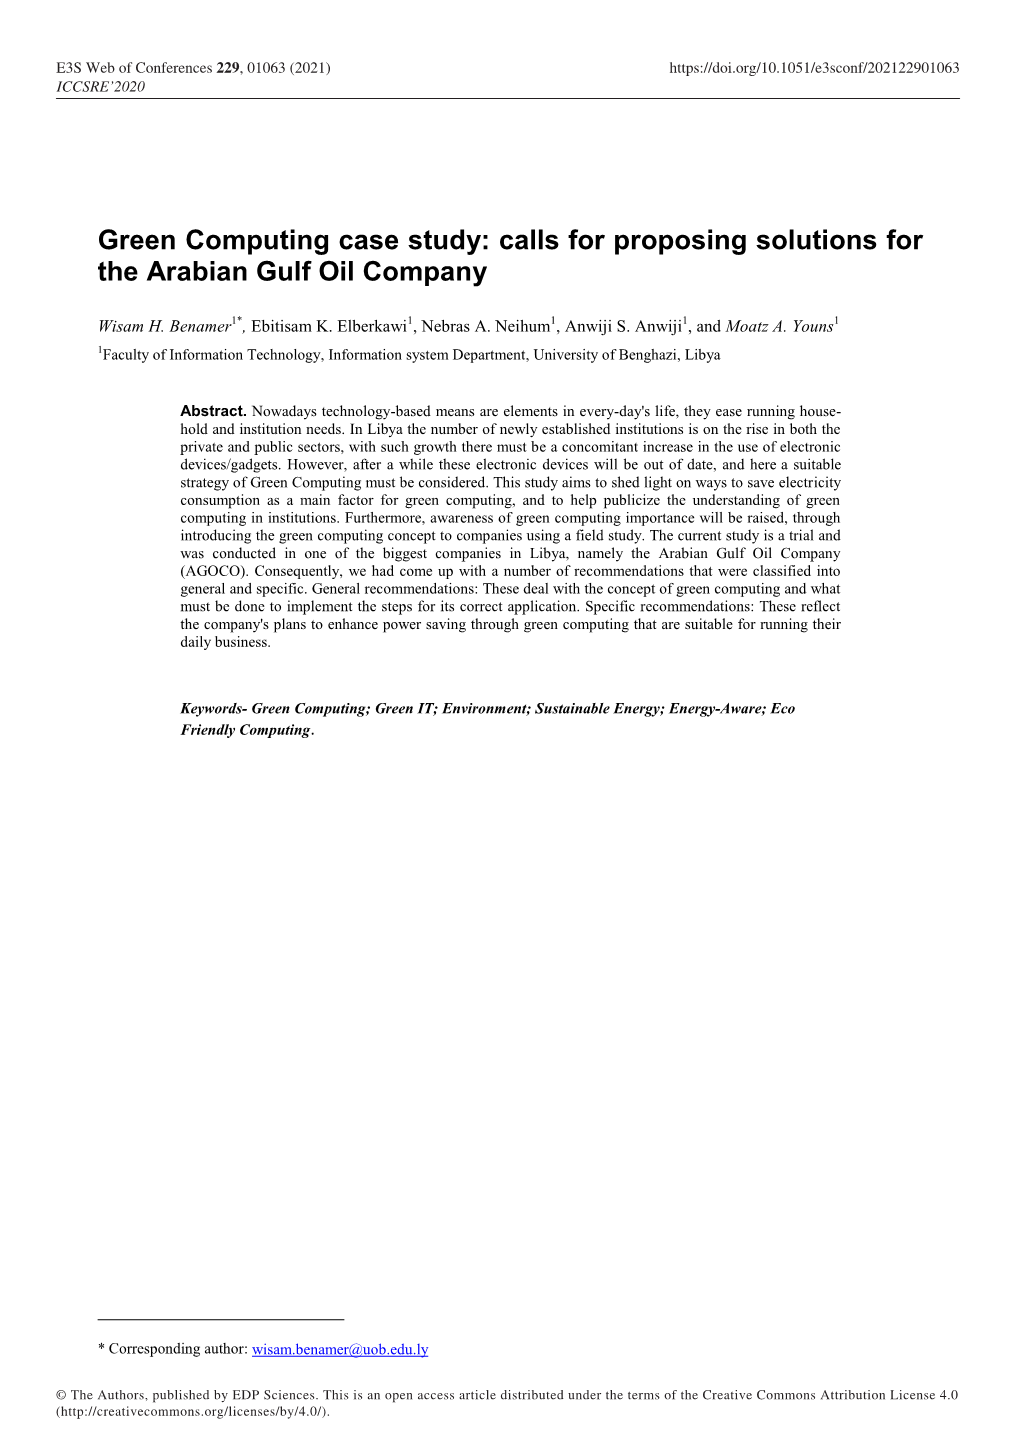 Green Computing Case Study: Calls for Proposing Solutions for the Arabian Gulf Oil Company